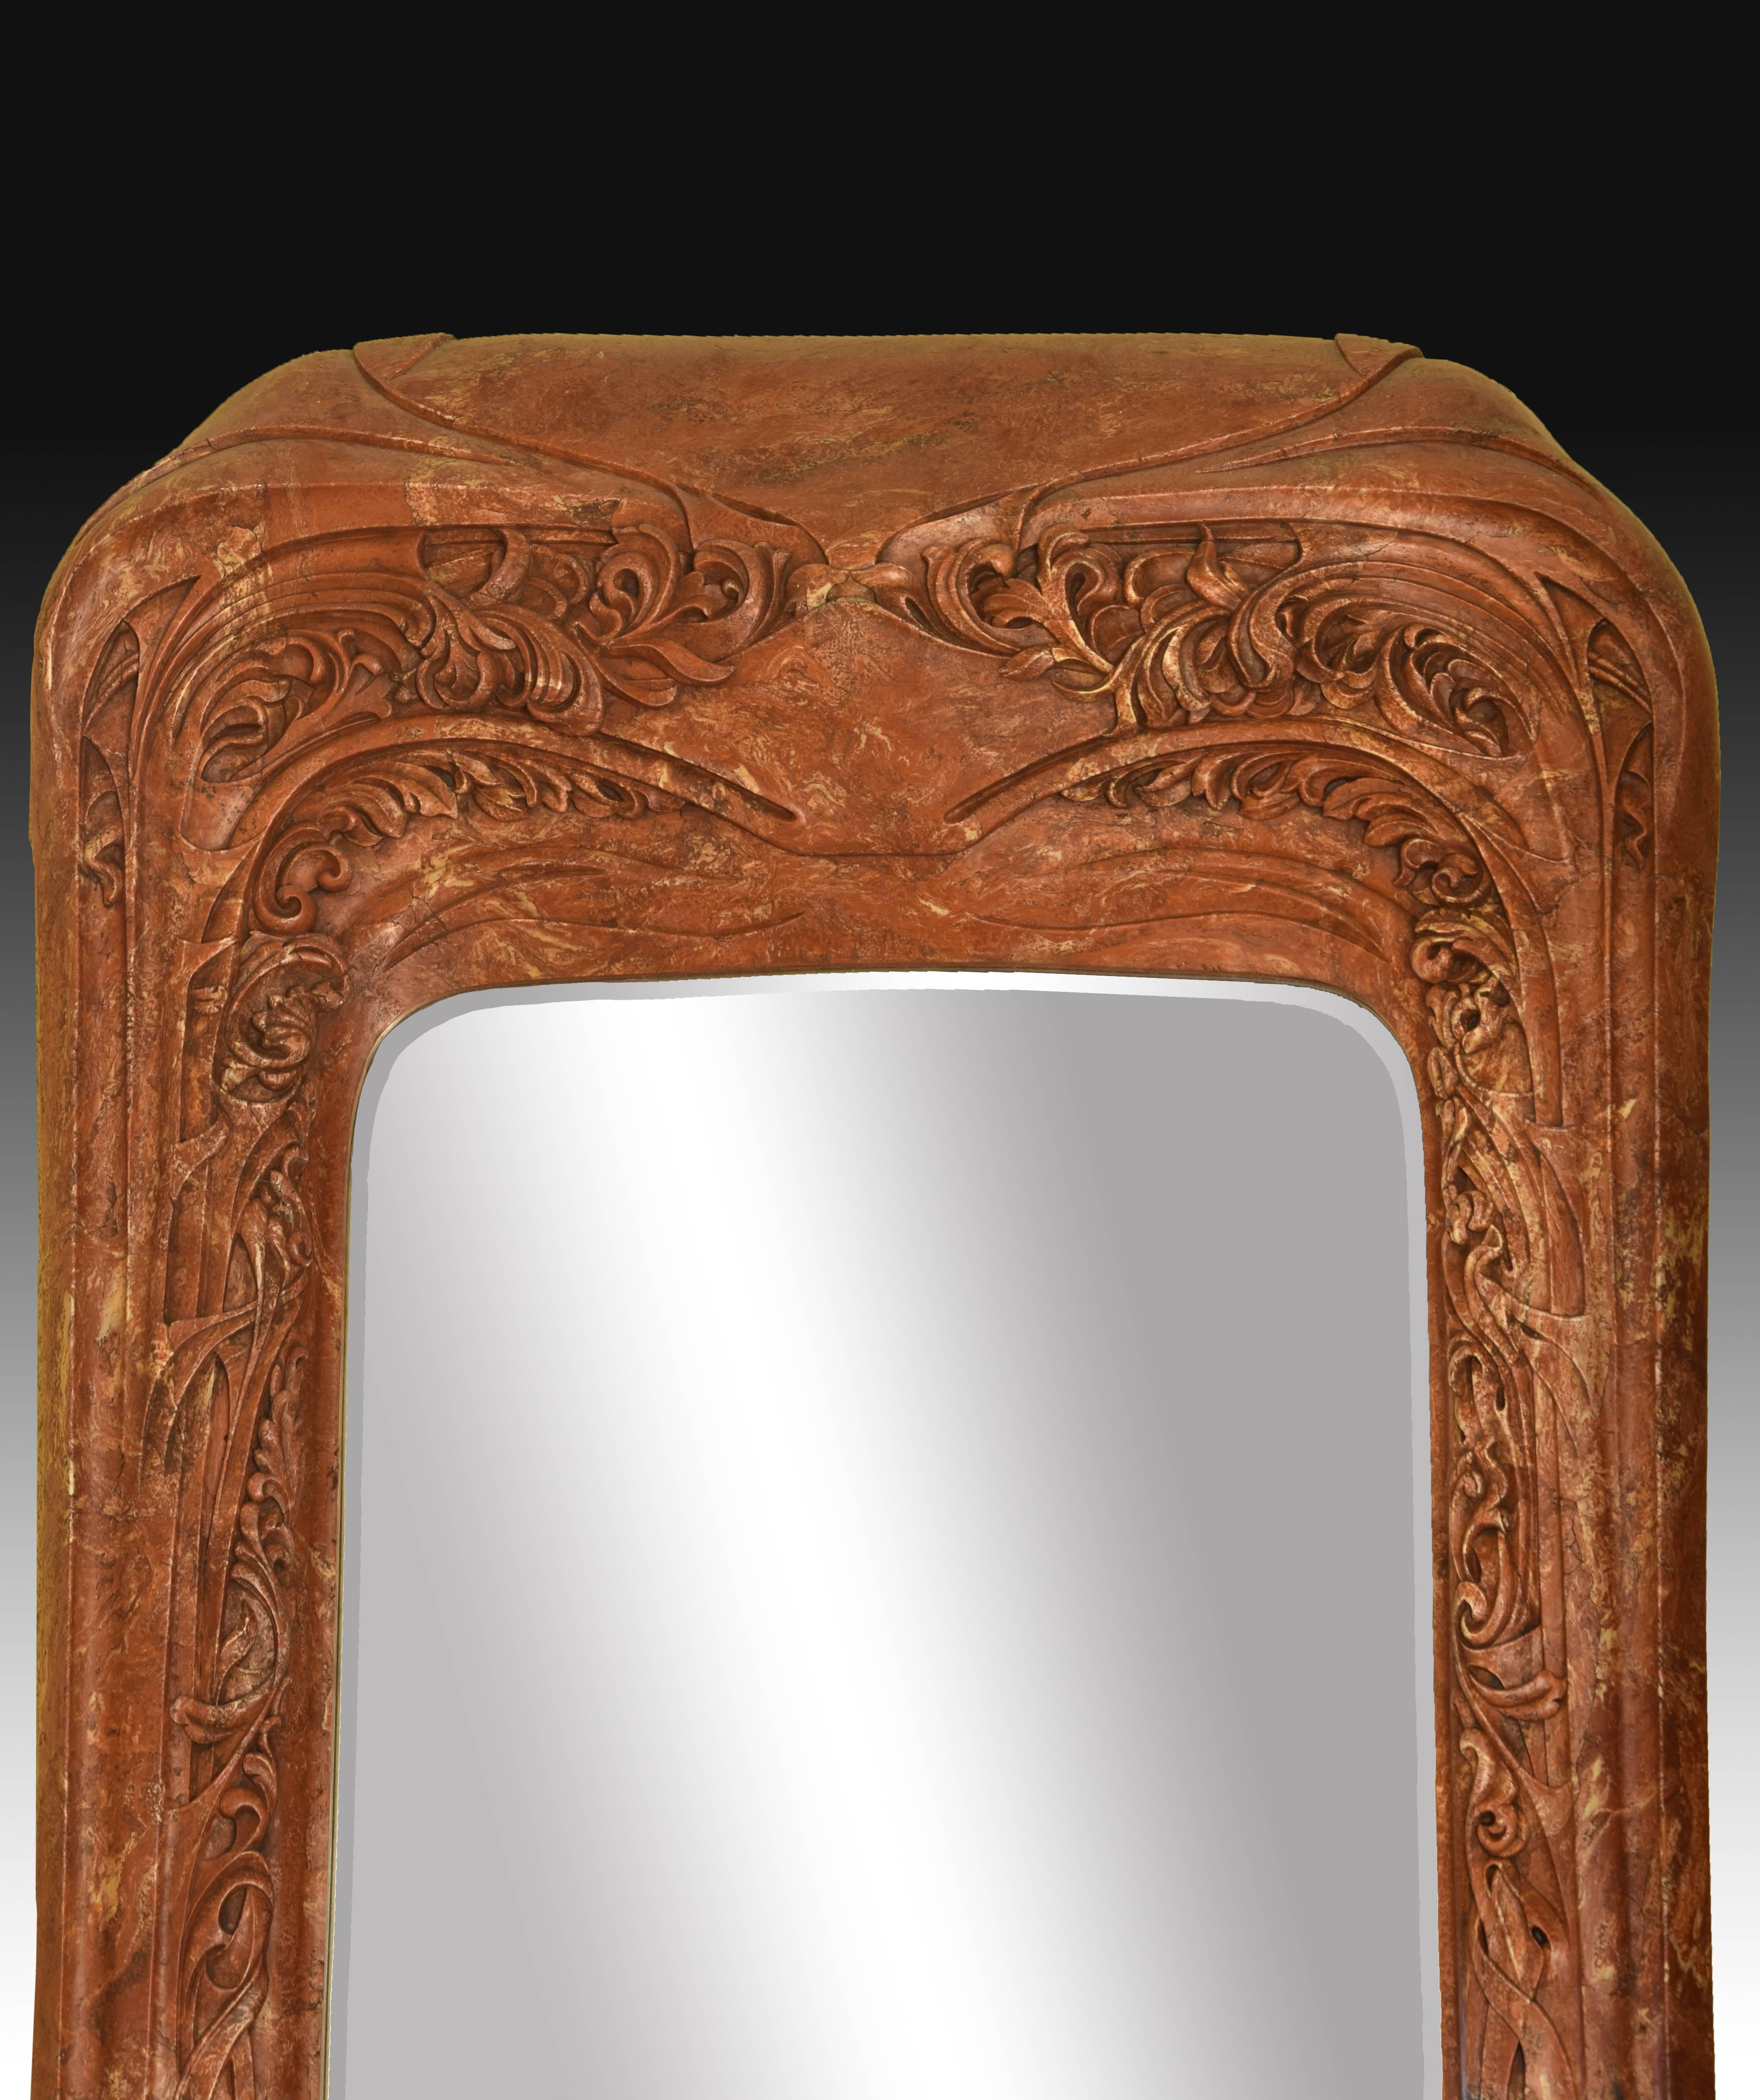 Rectangular mirror with frame decorated with vegetal motifs. Its lines, its detail and the protagonism of nature and the curved lines on the lines are the details that lead us to Modernism or Art Nouveau, an artistic style that emerged in Europe,